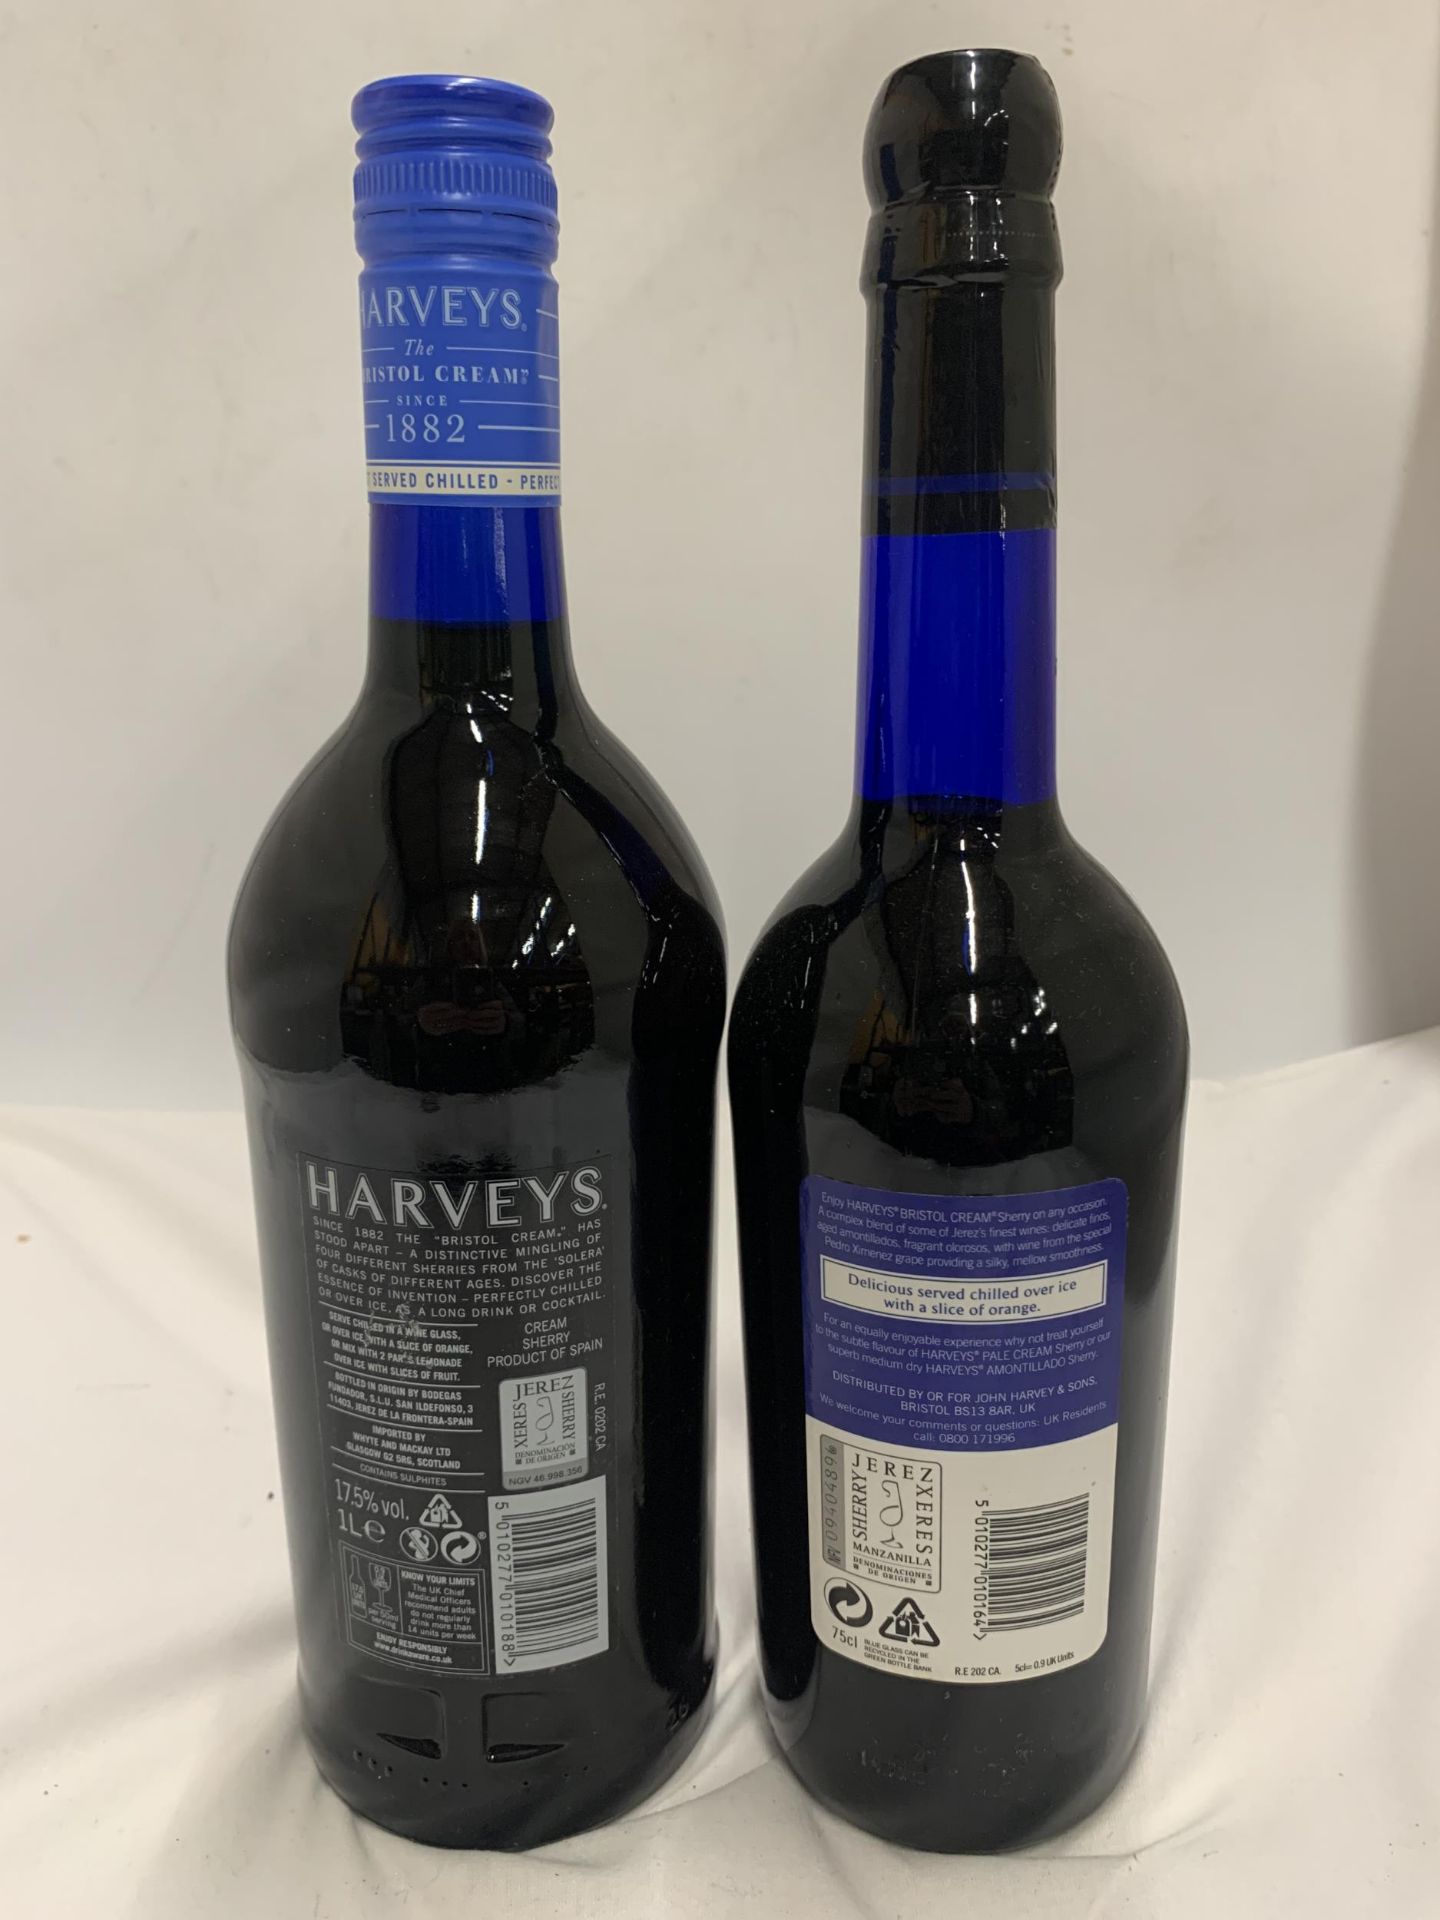 TWO BOTTLES - 1L HARVEY'S SOLERA SHERRY AND 75CL HARVEY'S BRISTOL CREAM - Image 2 of 2